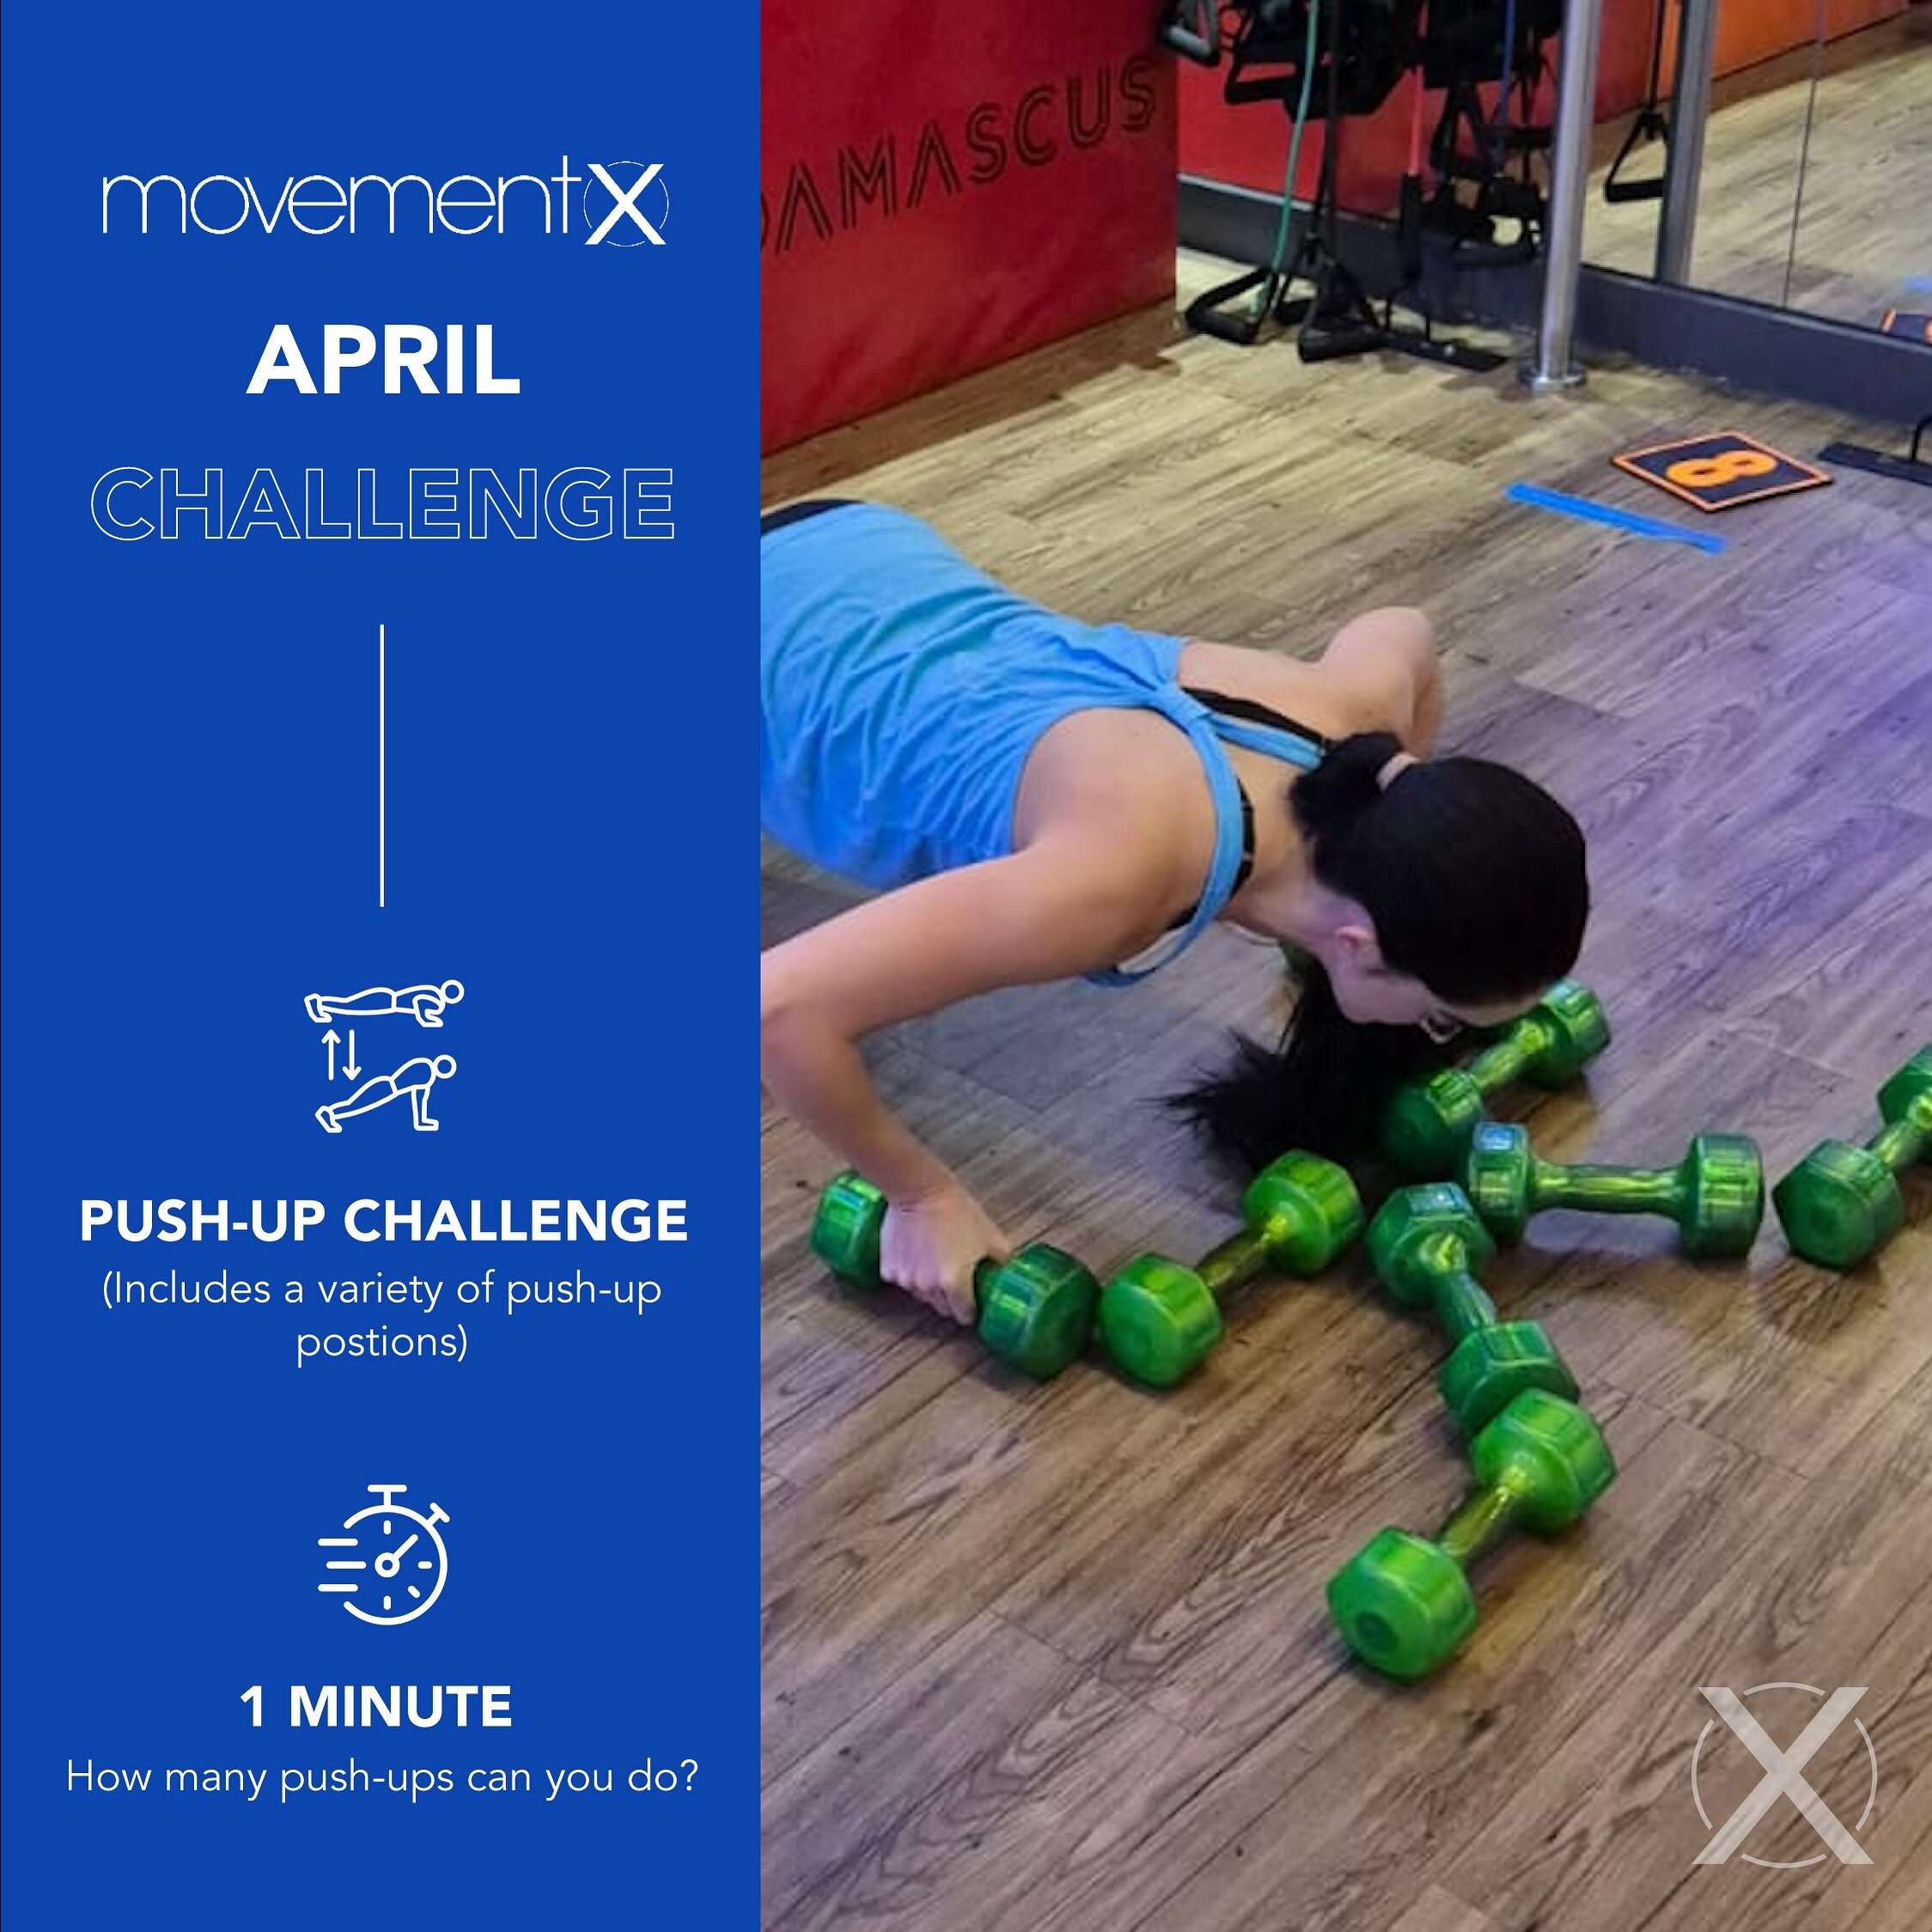 Our April challenge is here!🤩
How many push-ups can you do in 1 minute? Let&rsquo;s find out! 

Get ready to switch up positions and push yourself to the limit! 💪

#movementxbedfordview #fitnesschallenge #pushupchallenge #fitnessmotivation